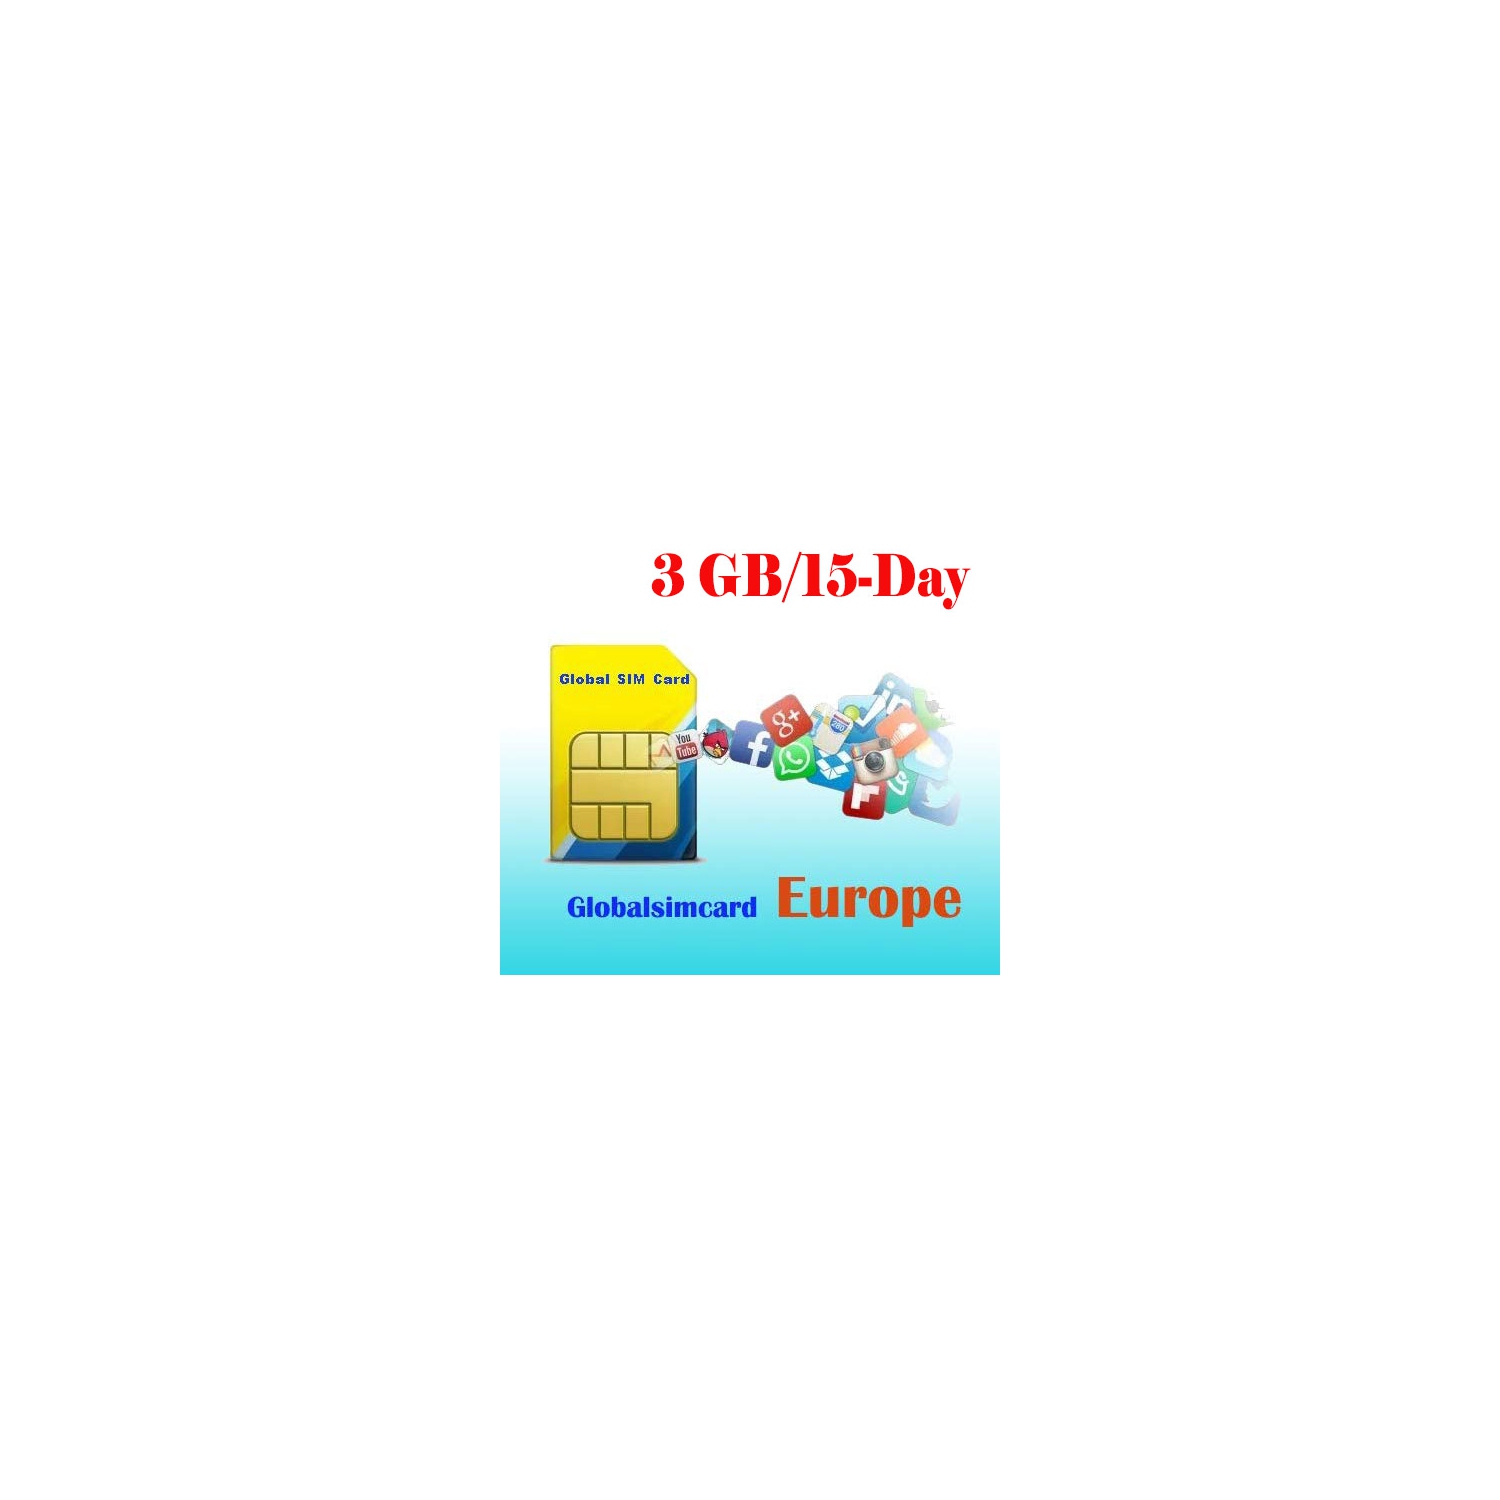 EUROPE 37 COUNTRIES Prepaid DATA Roaming SIM Card 15 Days Unlimited Data（3GB at 4G/LTE High Speed) Data Only